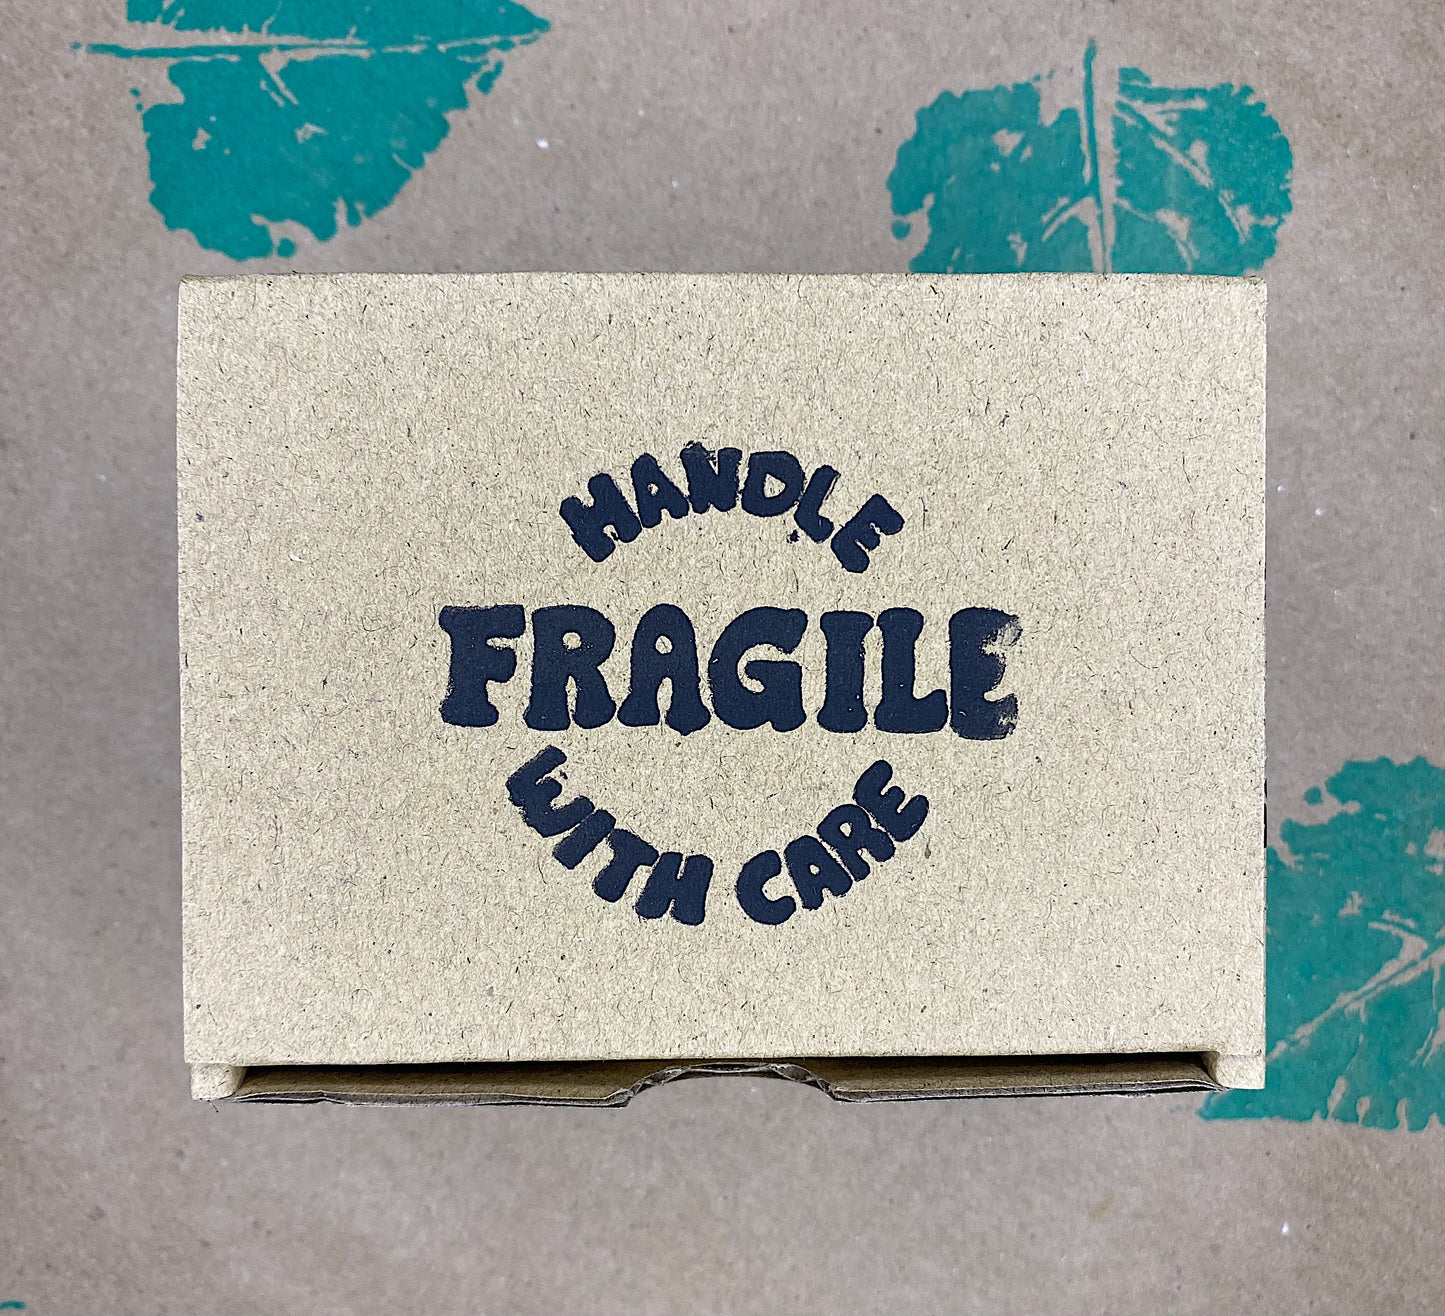 Handle with care FRAGILE